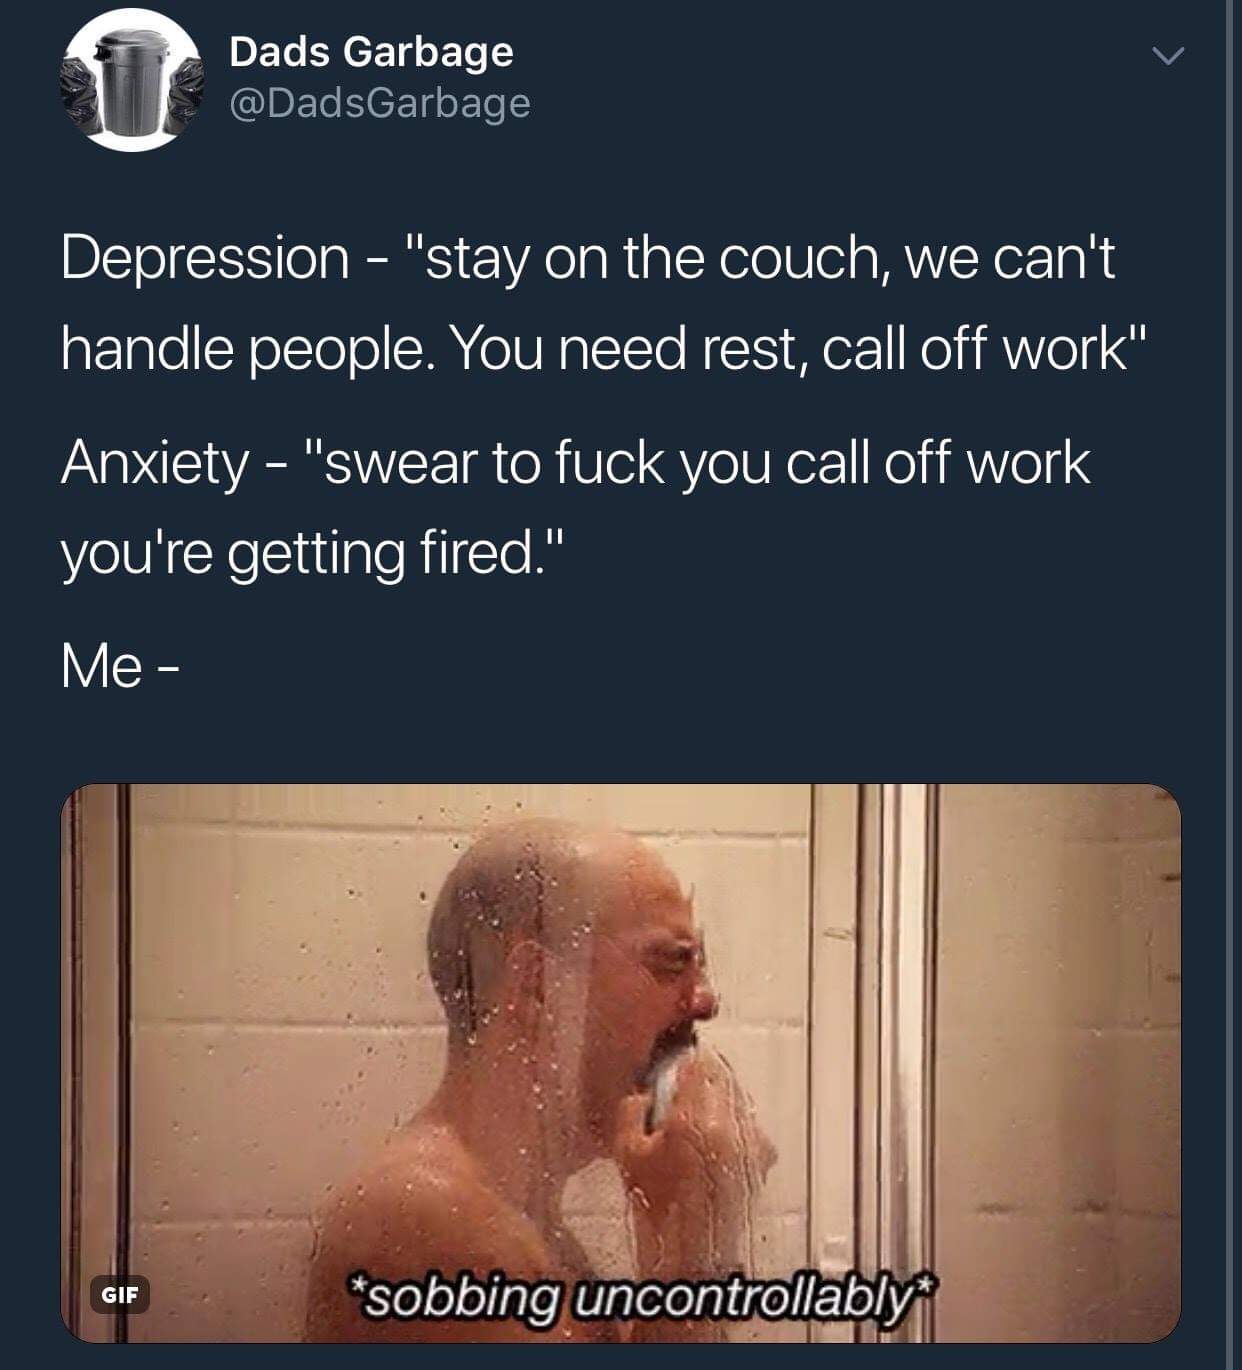 Depression meme - Fuck - Dads Garbage Depression "stay on the couch, we can't handle people. You need rest, call off work" Anxiety "swear to fuck you call off work you're getting fired." Me Gif sobbing uncontrollably